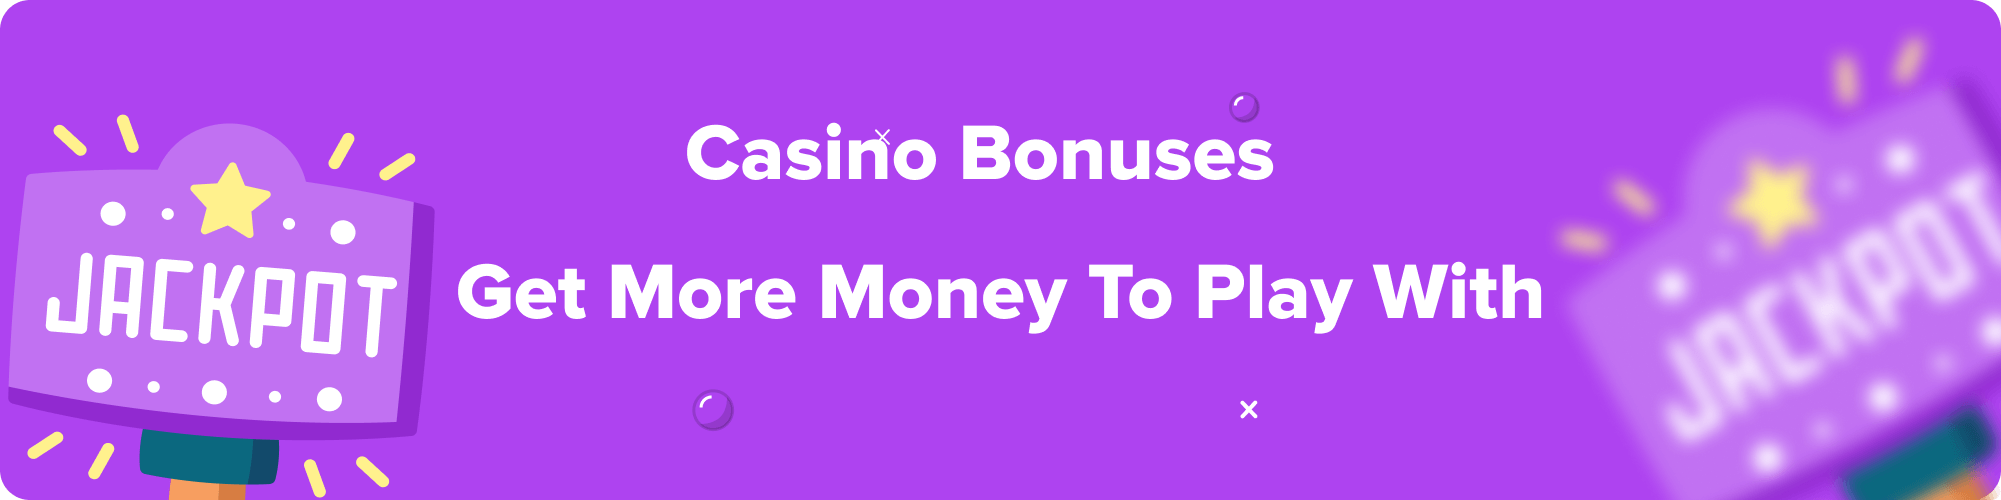 Casino Bonuses - Get more money to play with